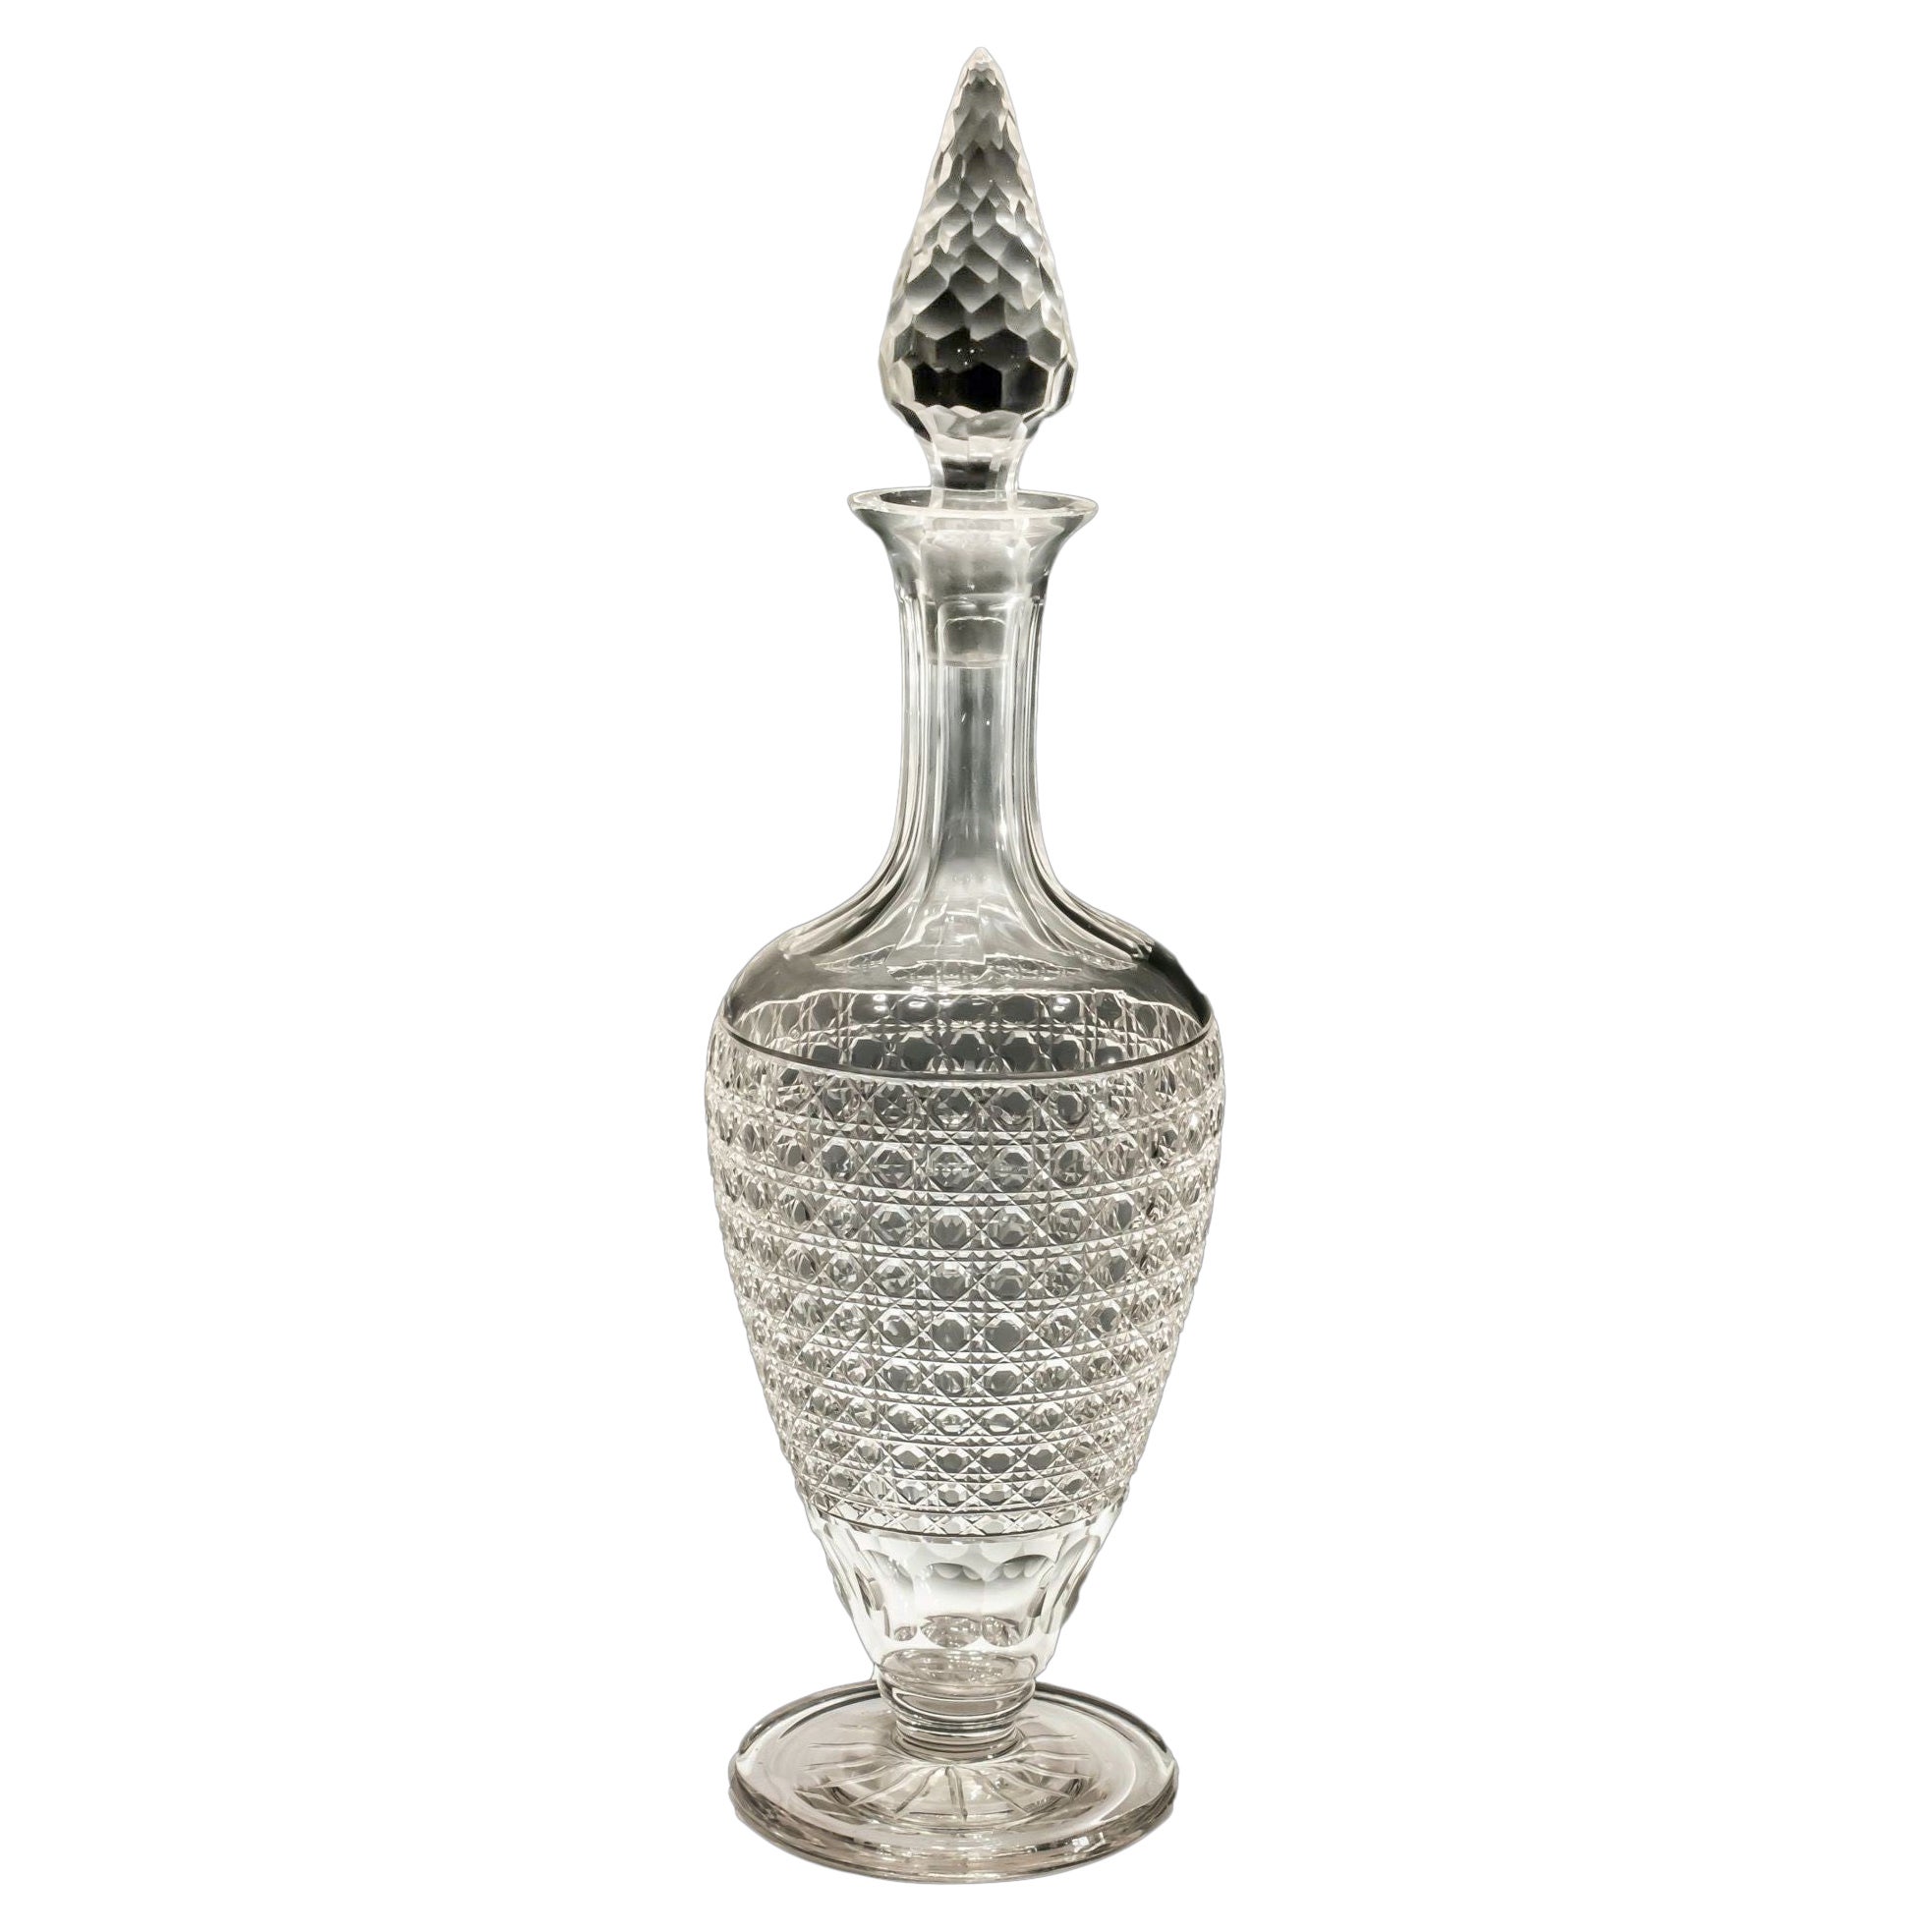 Monumental Victorian Rehoboam Decanter For Sale